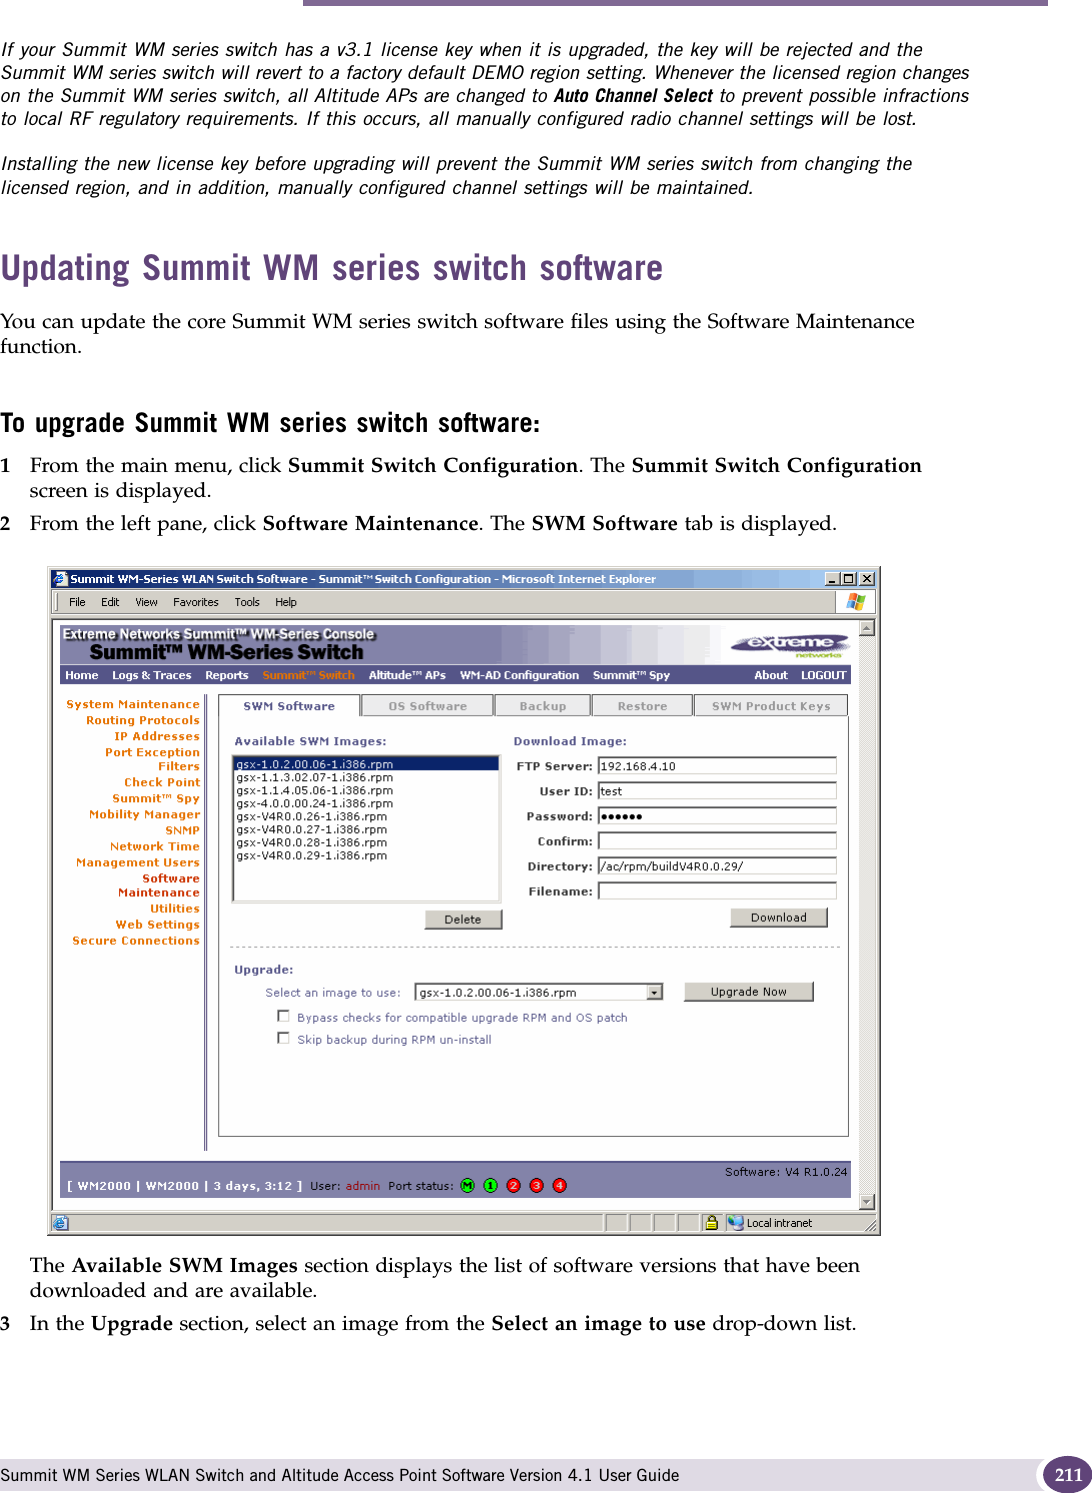 Performing Summit WM series switch software maintenance Summit WM Series WLAN Switch and Altitude Access Point Software Version 4.1 User Guide 211If your Summit WM series switch has a v3.1 license key when it is upgraded, the key will be rejected and the Summit WM series switch will revert to a factory default DEMO region setting. Whenever the licensed region changes on the Summit WM series switch, all Altitude APs are changed to Auto Channel Select to prevent possible infractions to local RF regulatory requirements. If this occurs, all manually configured radio channel settings will be lost.Installing the new license key before upgrading will prevent the Summit WM series switch from changing the licensed region, and in addition, manually configured channel settings will be maintained.Updating Summit WM series switch softwareYou can update the core Summit WM series switch software files using the Software Maintenance function.To upgrade Summit WM series switch software:1From the main menu, click Summit Switch Configuration. The Summit Switch Configuration screen is displayed.2From the left pane, click Software Maintenance. The SWM Software tab is displayed.The Available SWM Images section displays the list of software versions that have been downloaded and are available.3In the Upgrade section, select an image from the Select an image to use drop-down list.